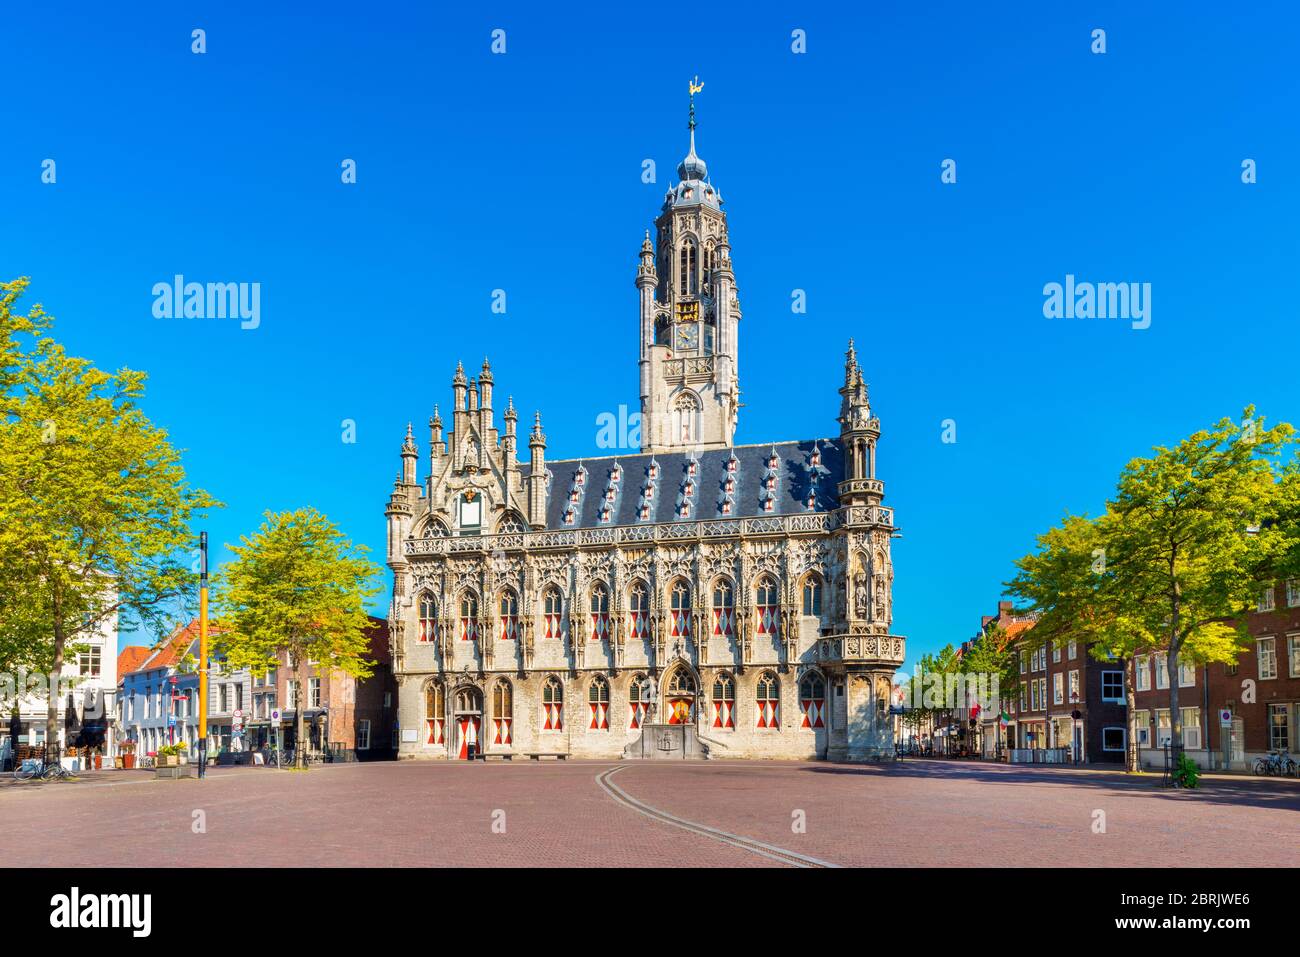 City Hall of Middelburg, Zeeland province, Netherlands. The late gothic styled building was completed in 1520. Middelburg is the capital of Zeeland. Stock Photo